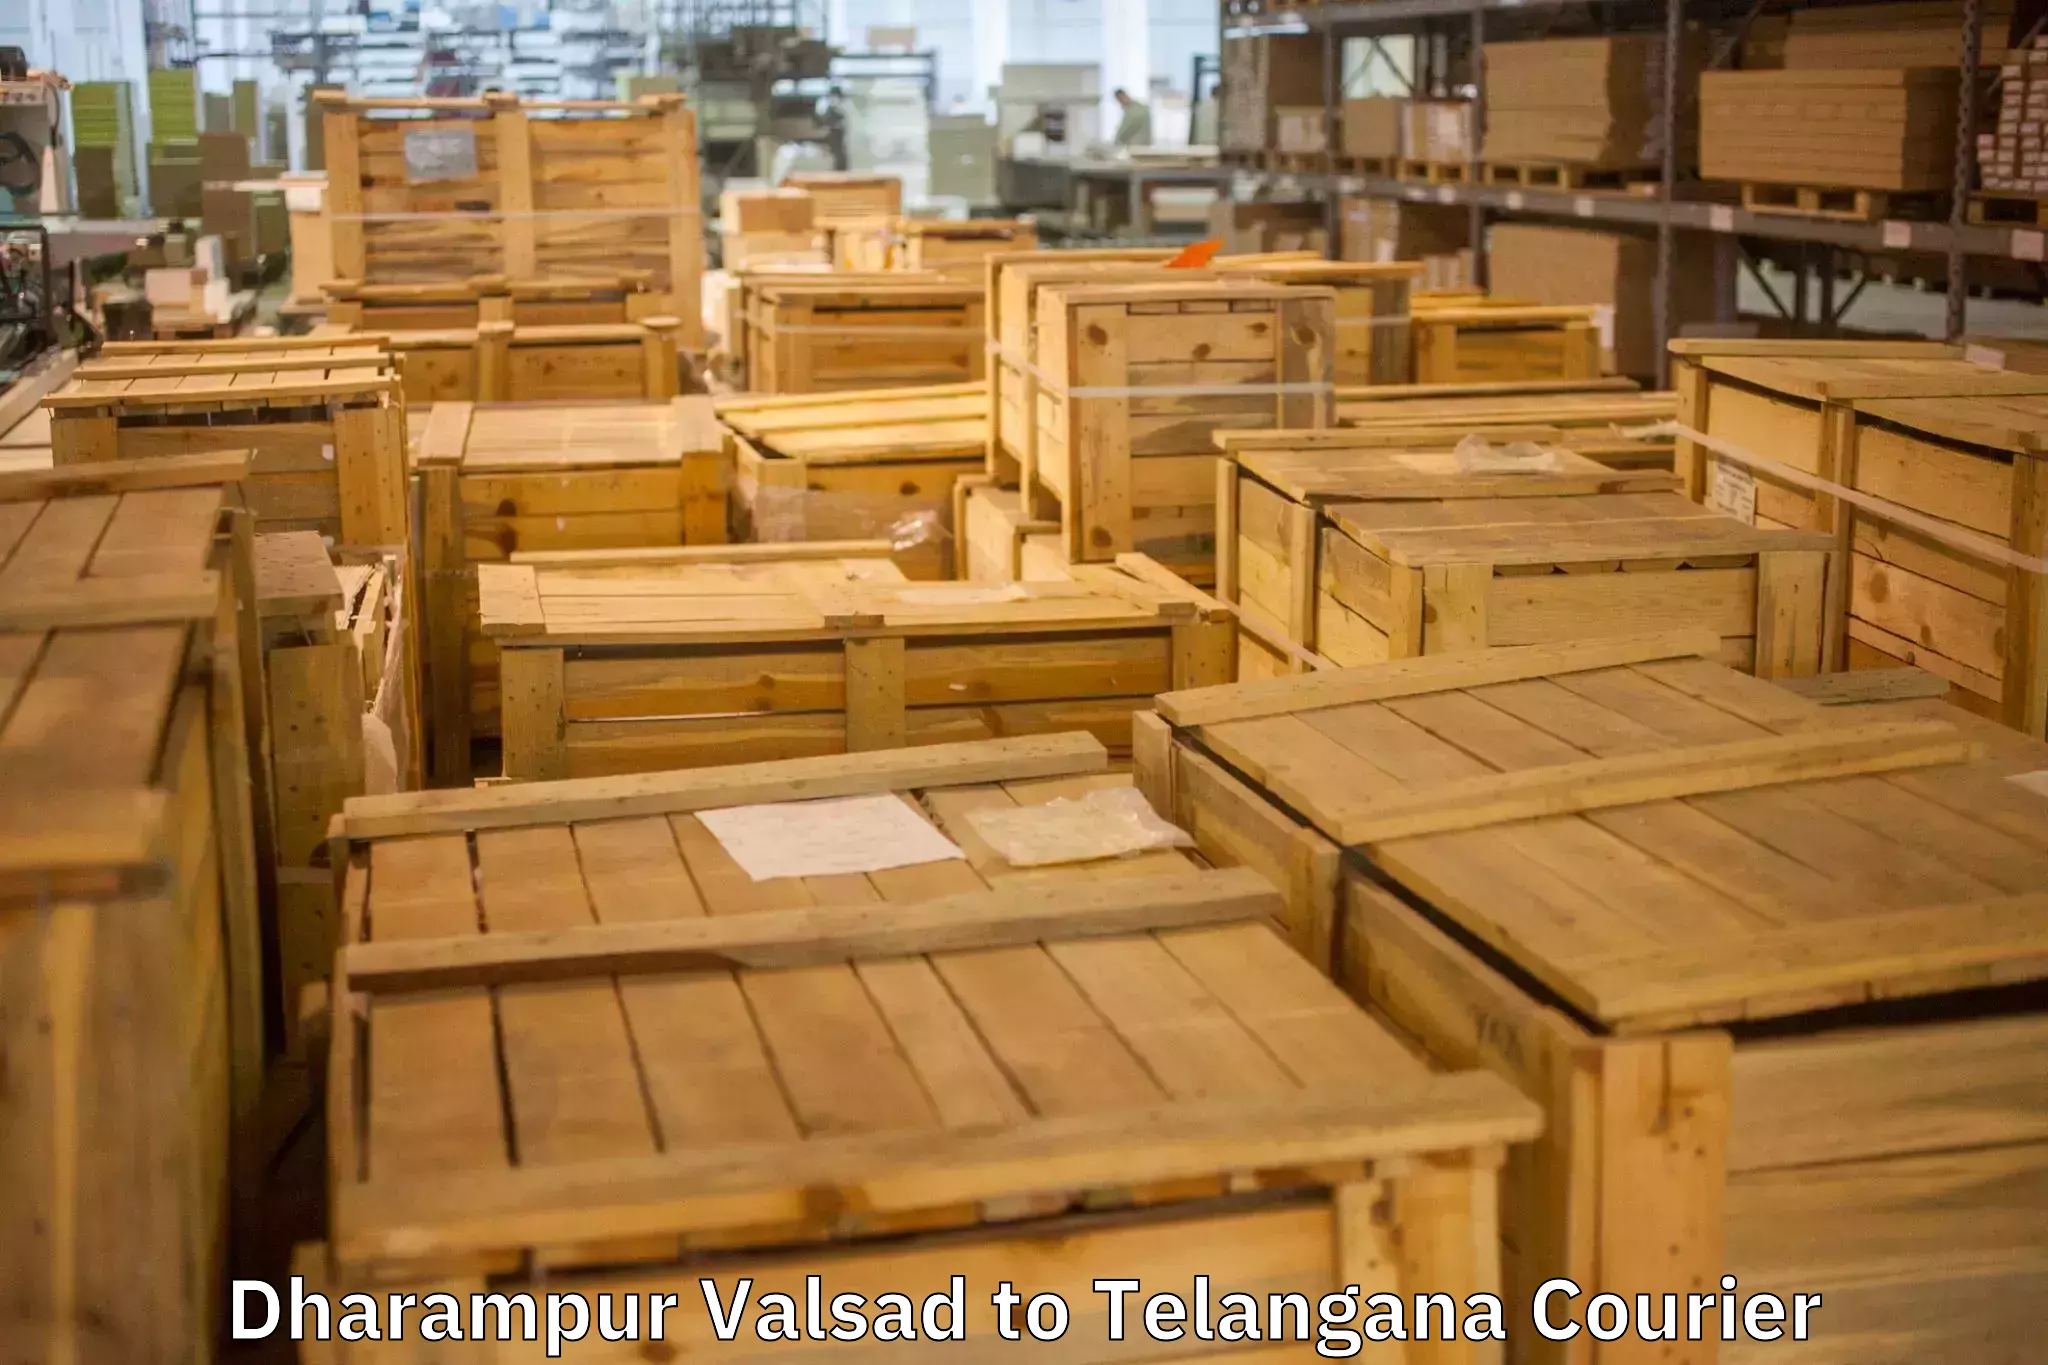 Furniture relocation experts Dharampur Valsad to Yacharam